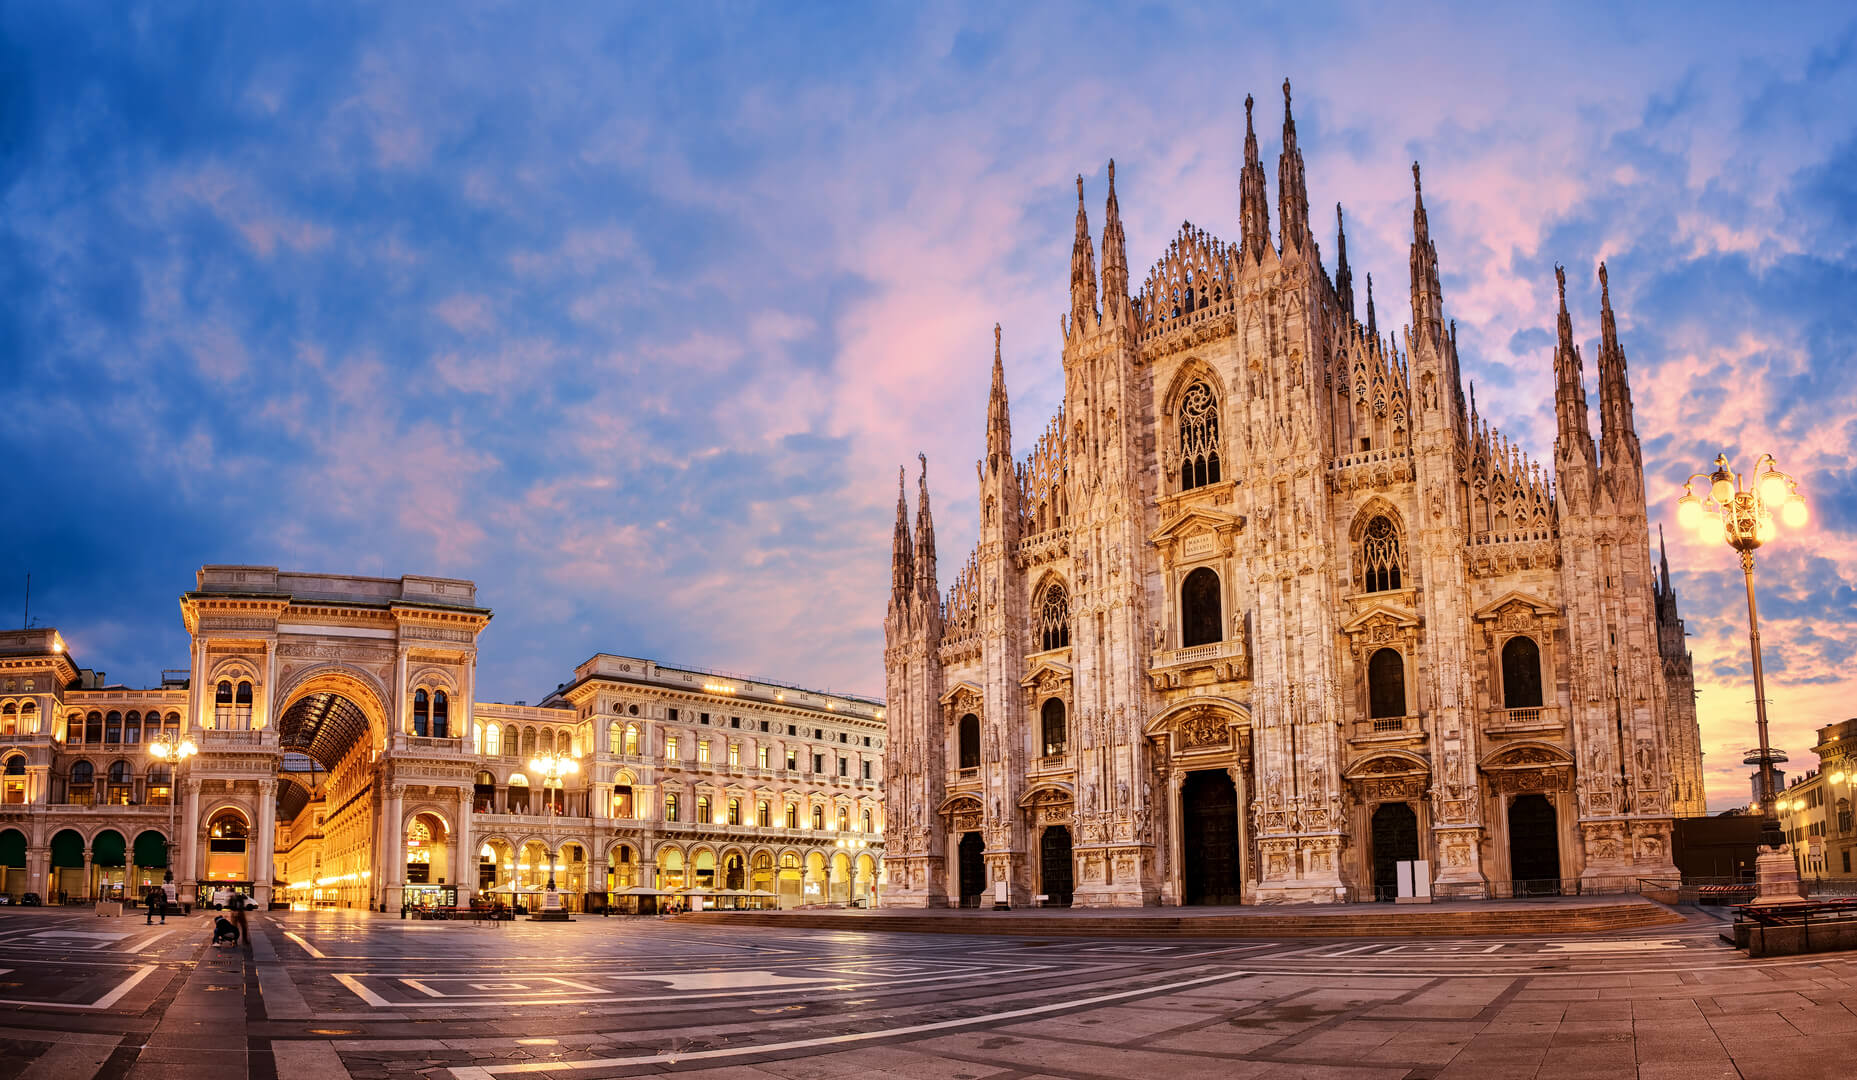 Milan Cathedral, Duomo di Milano, Italy, one of the largest churches in the world on sunrise